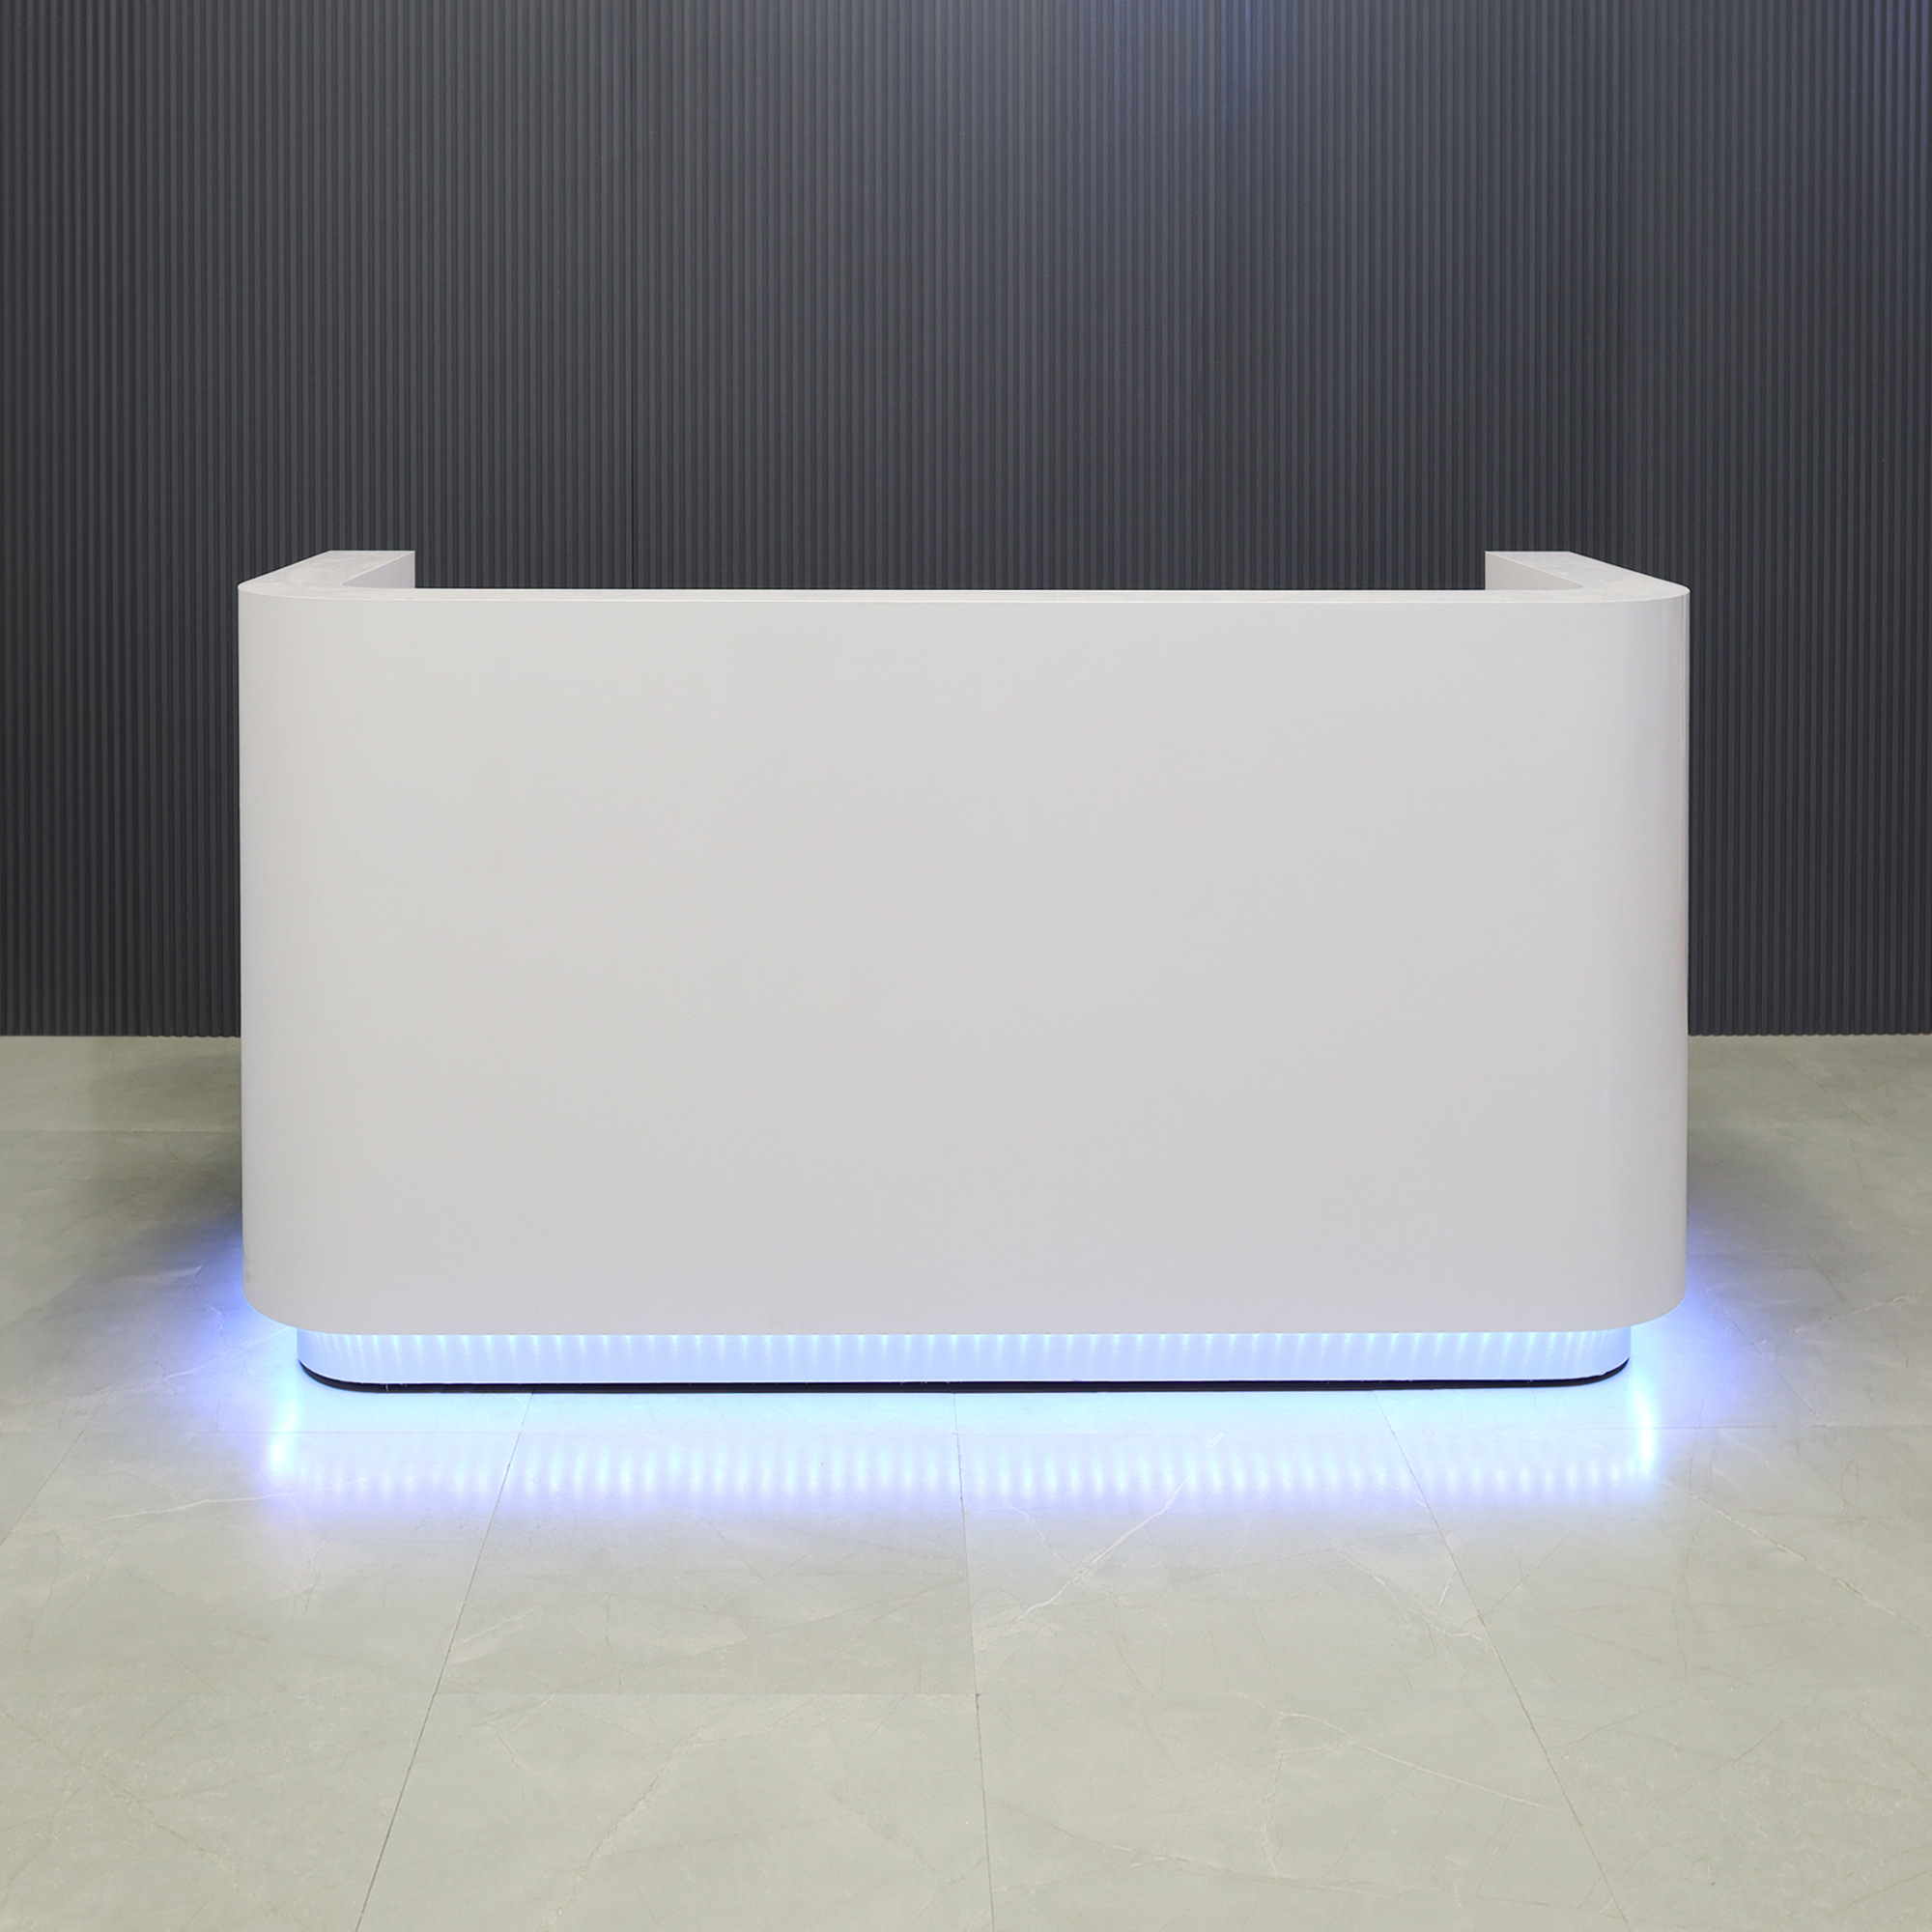 84-inch Nola Custom Reception Desk in white gloss laminate main desk and brushed aluminum toe-kick, with color LED, shown here.